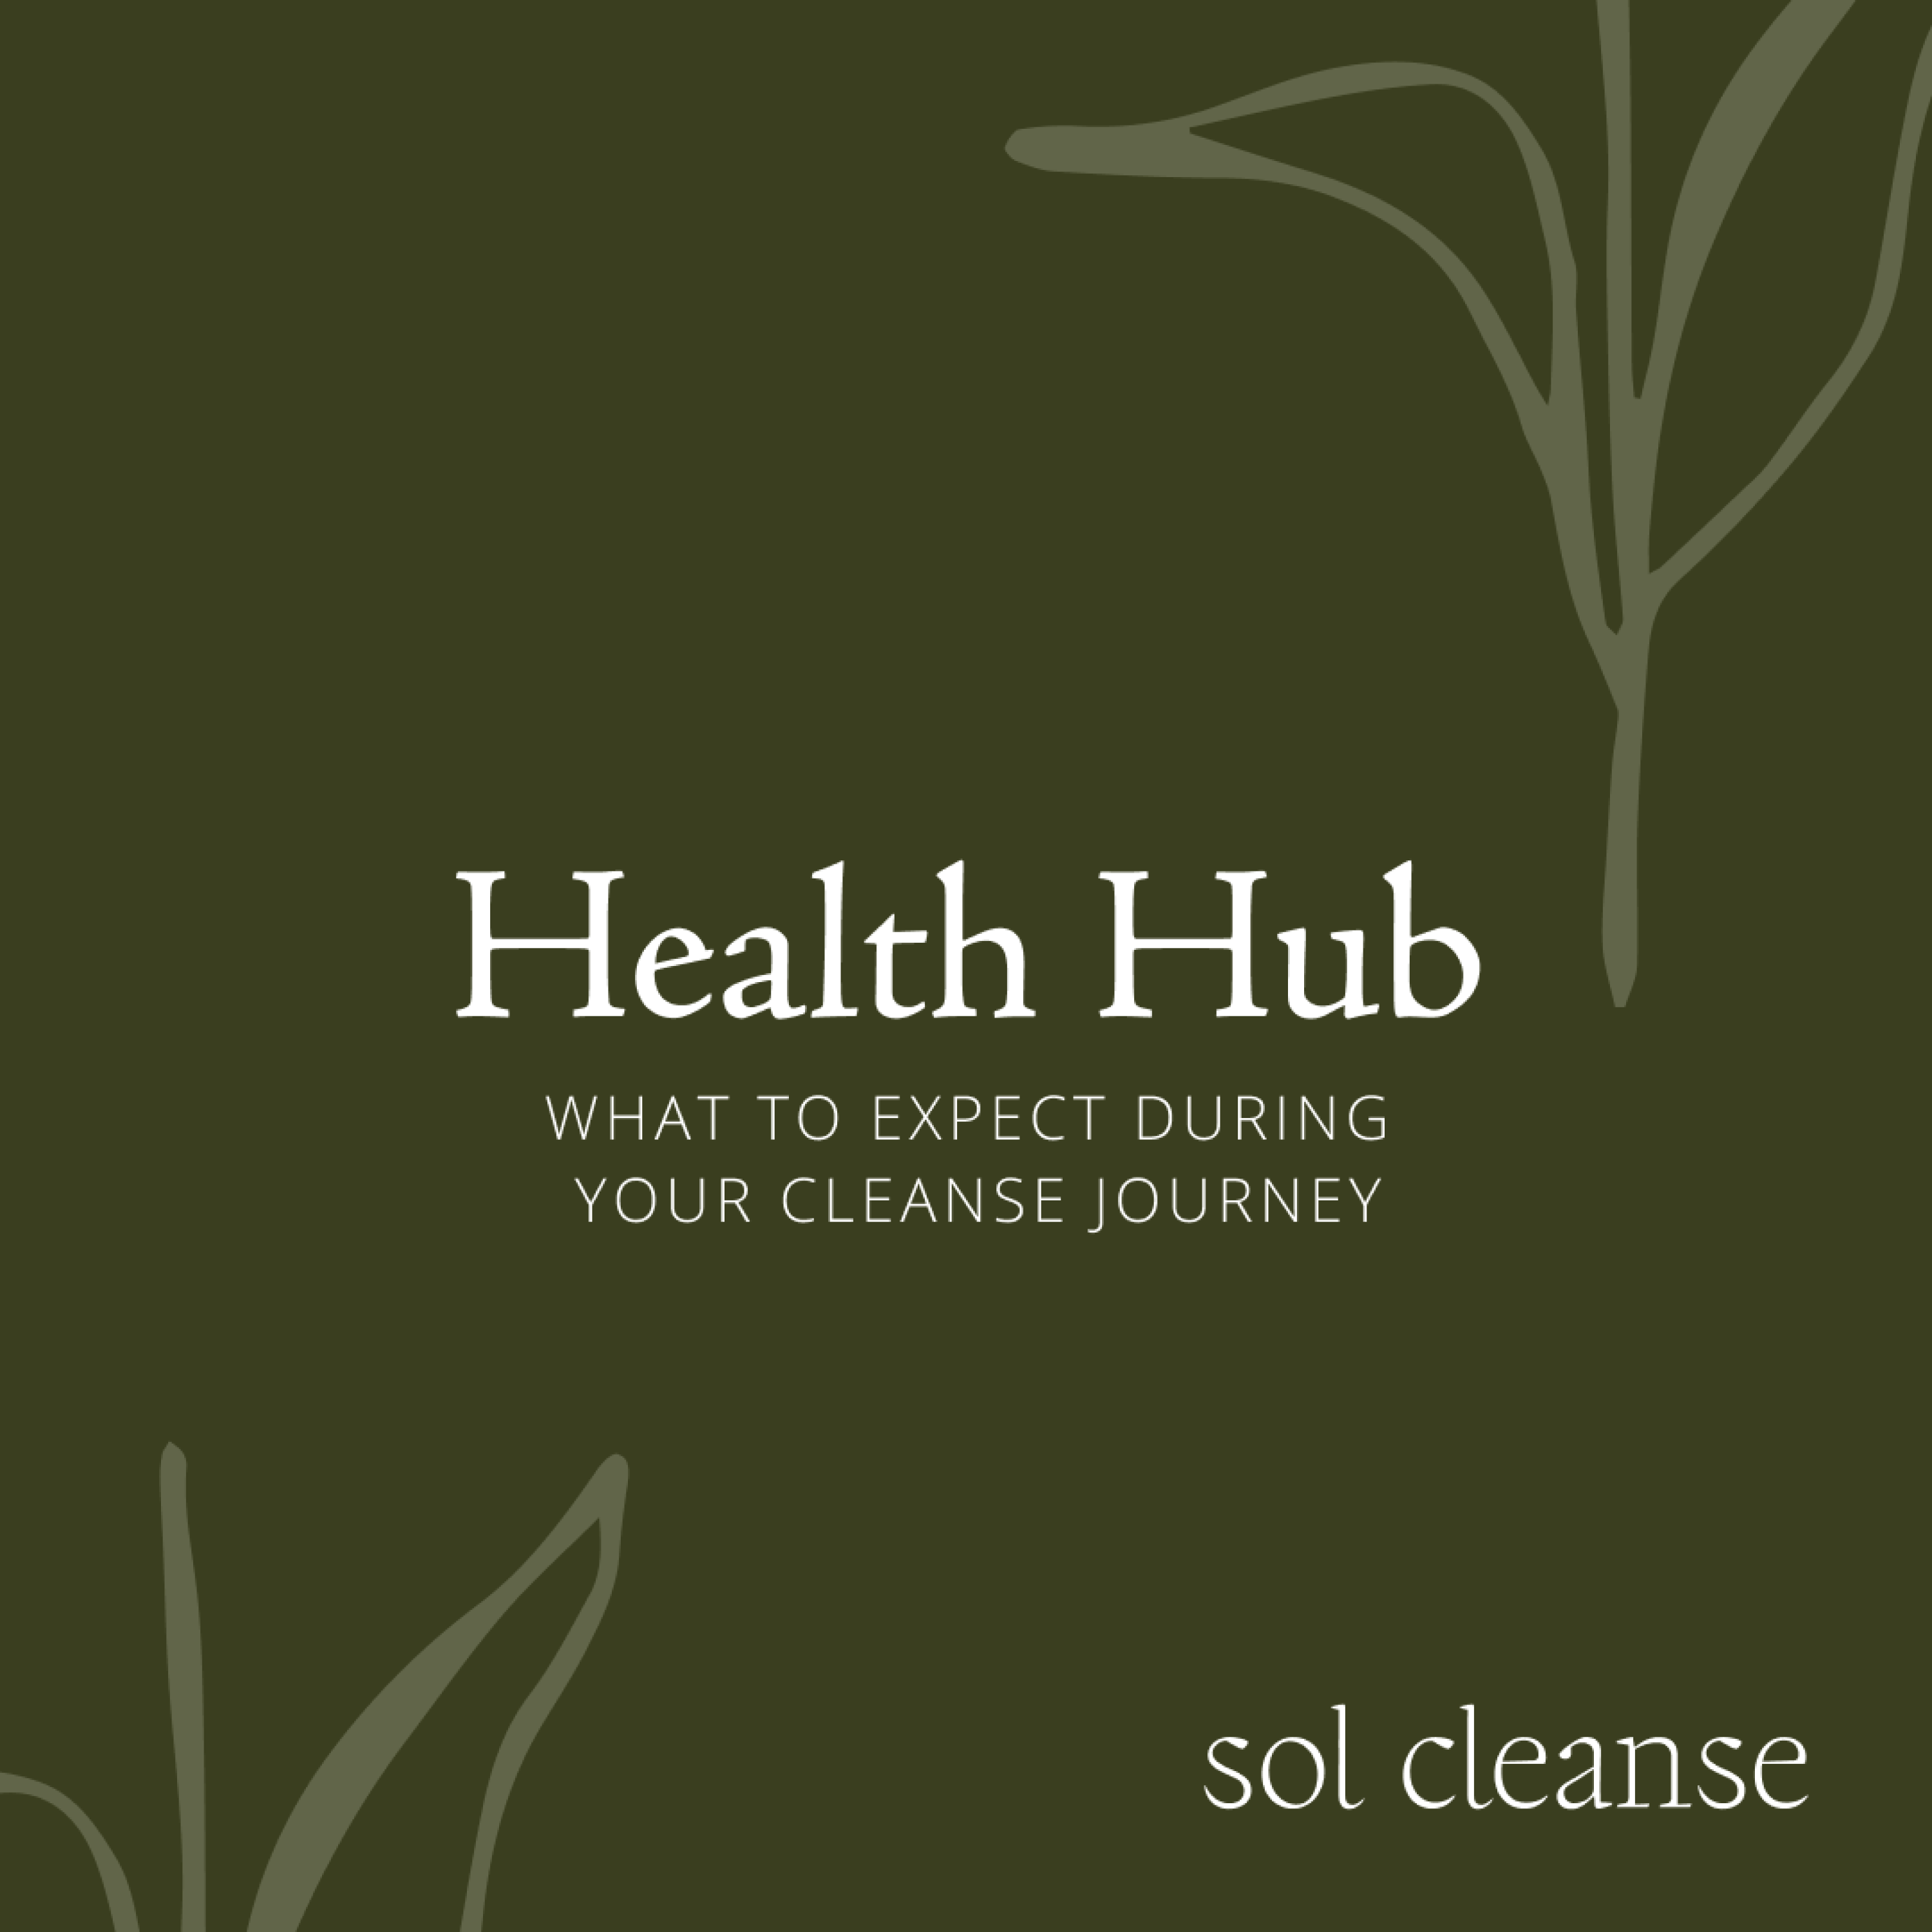 Health Hub: What to expect during your cleanse journey